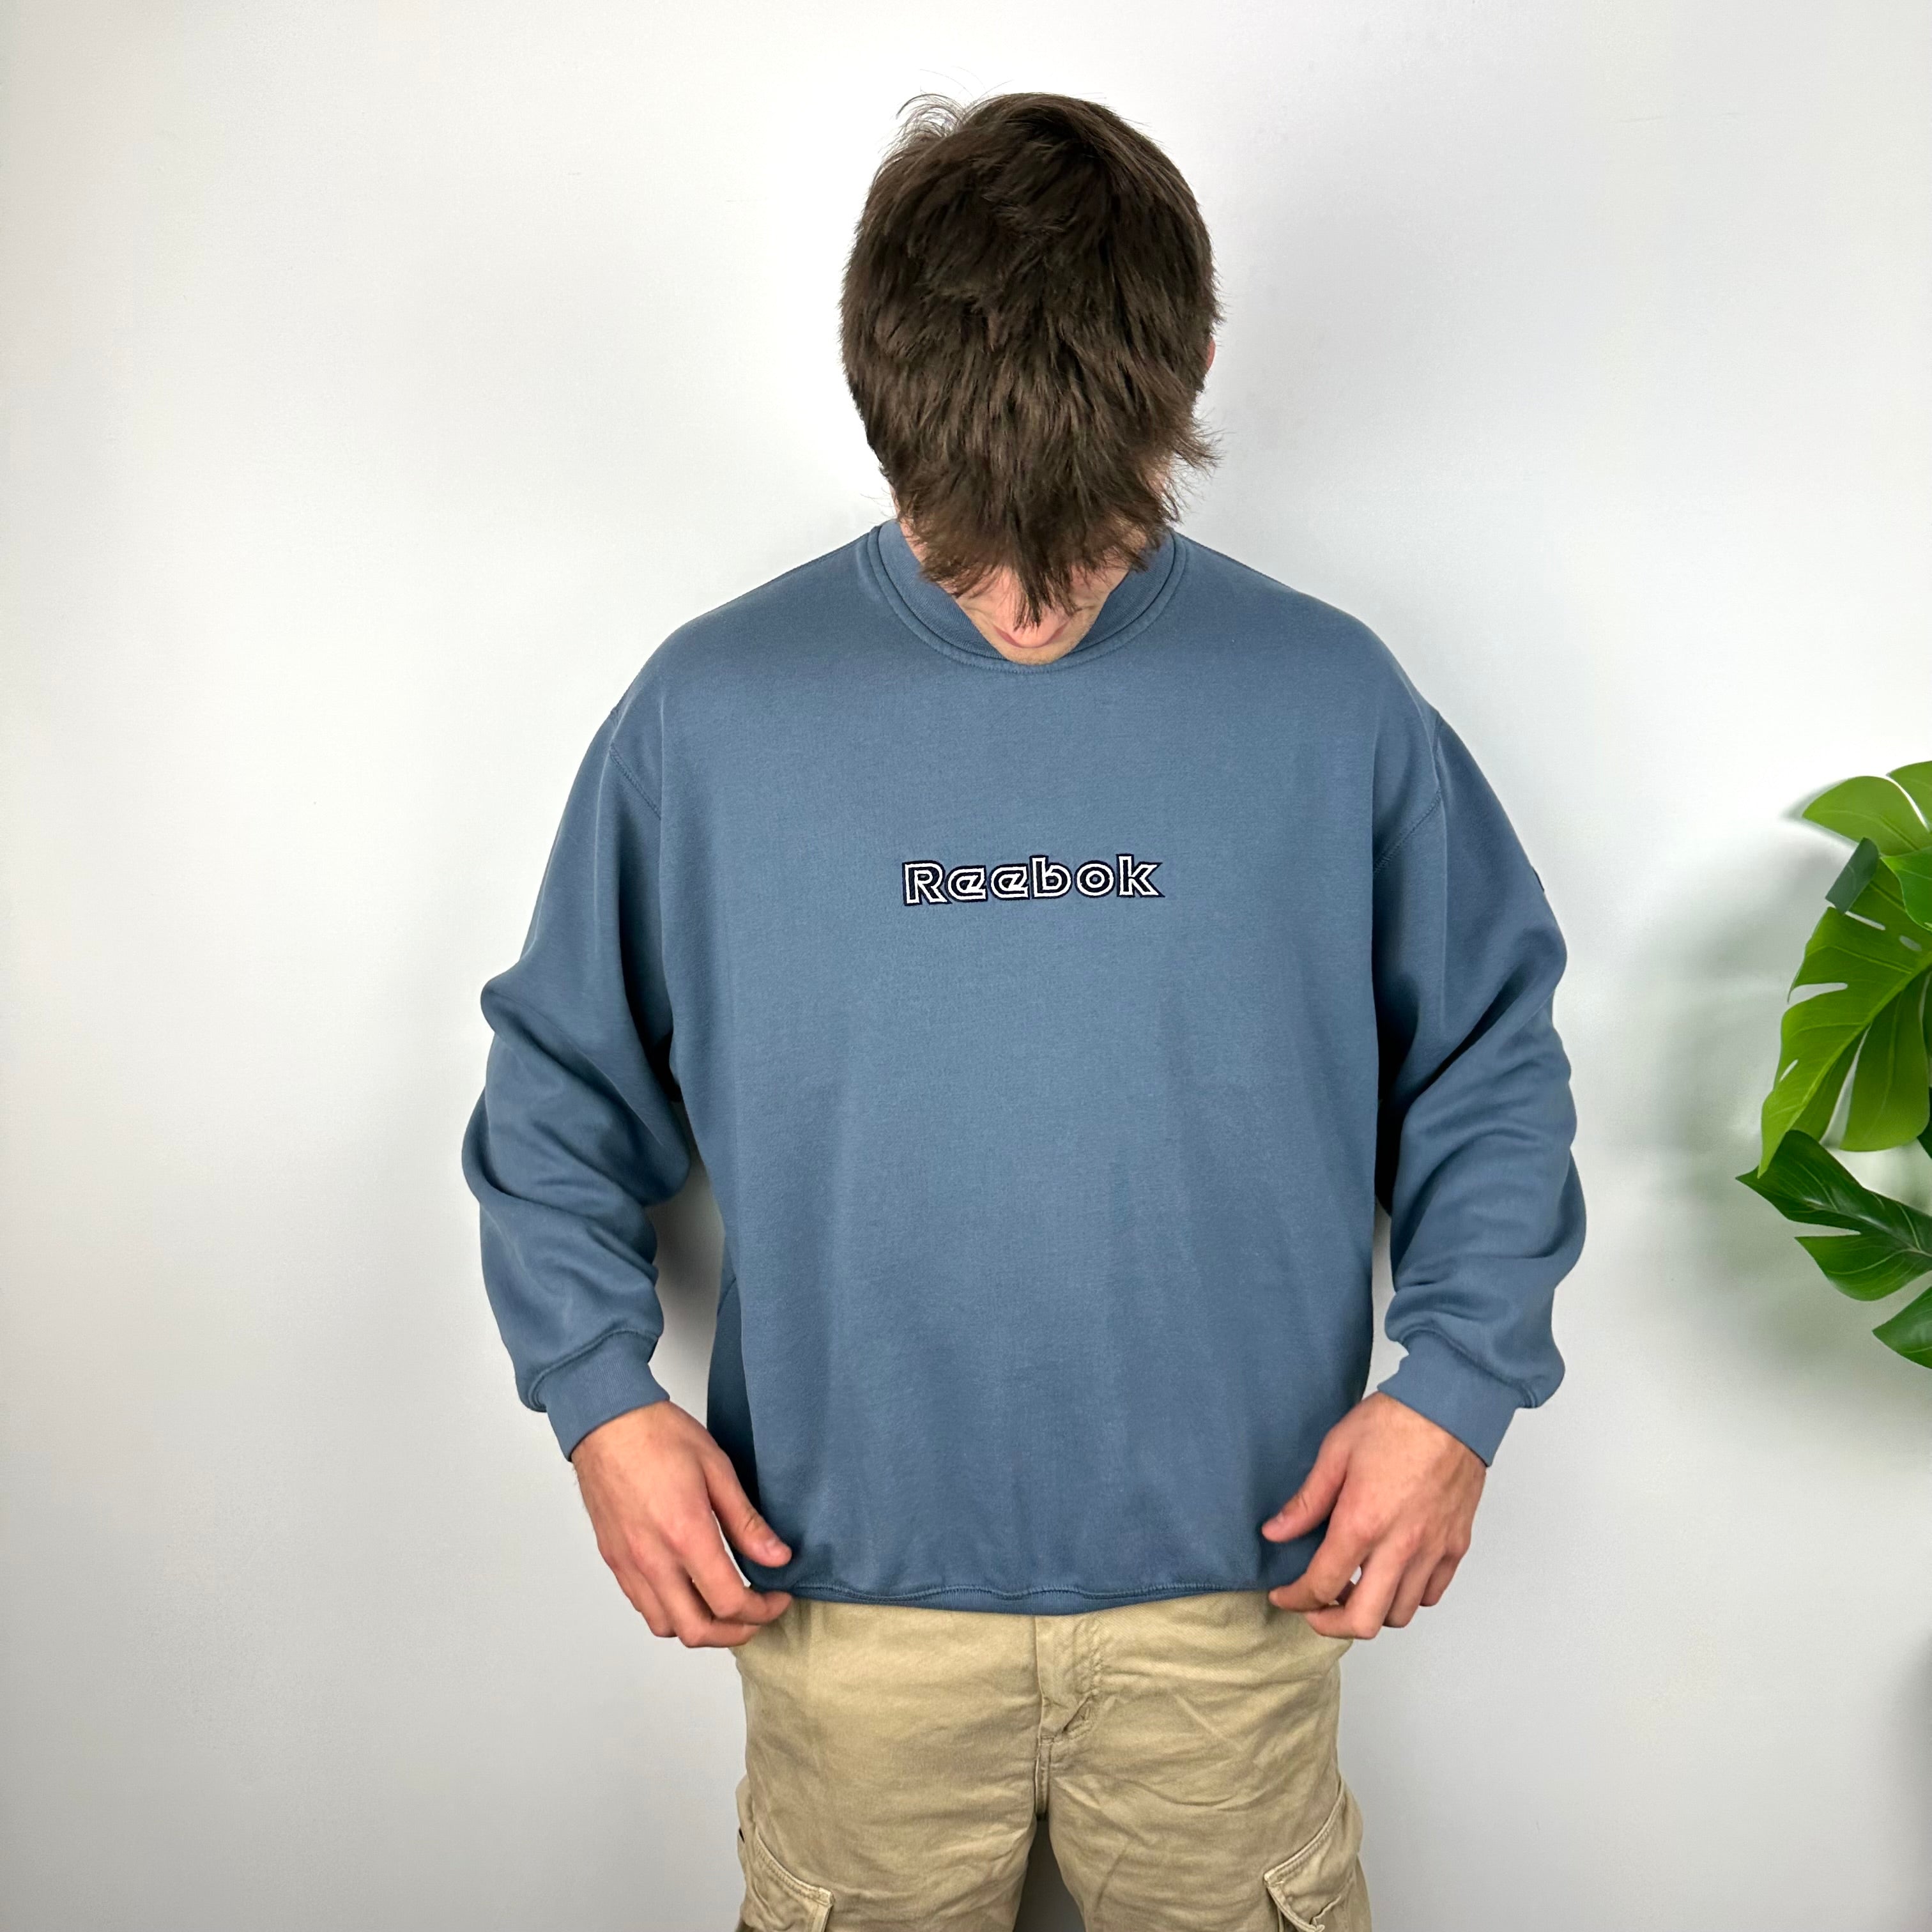 Reebok Blue Embroidered Spell Out Sweatshirt (M)